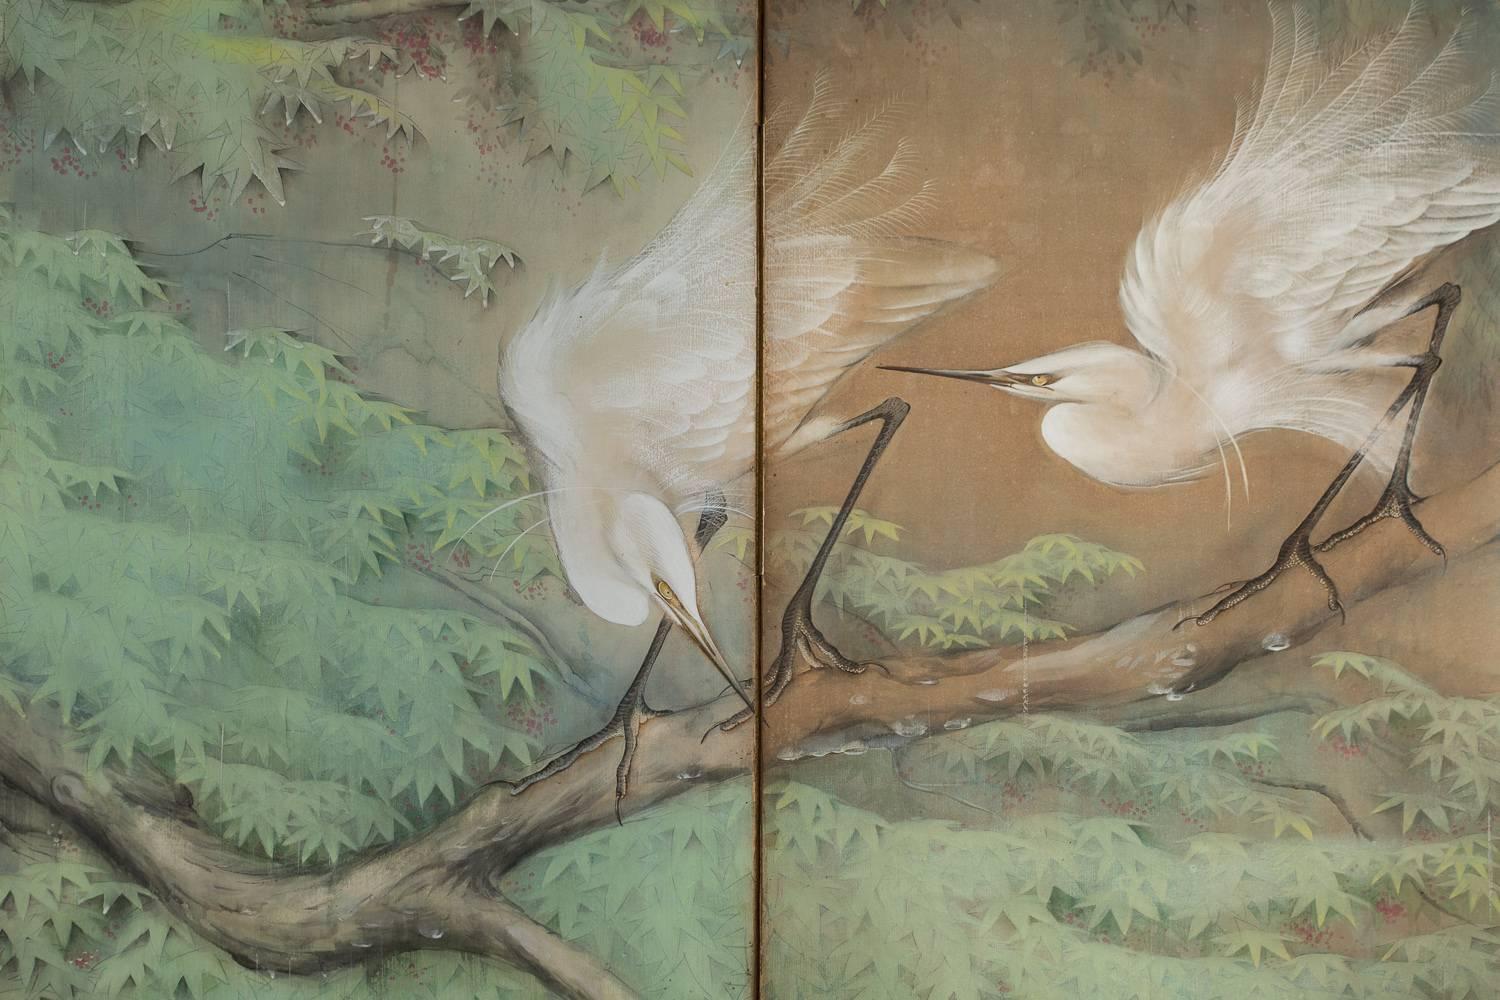 Japanese Six Panel Screen: Egrets in the Rain
Mineral pigments on mulberry paper with tones of silver in the foreground
Signed and sealed 北遥 Hokuyo.  Born in Kyoto, Toda Hokuyo graduated from the Kyoto City Public Craft School in 1922 and from its